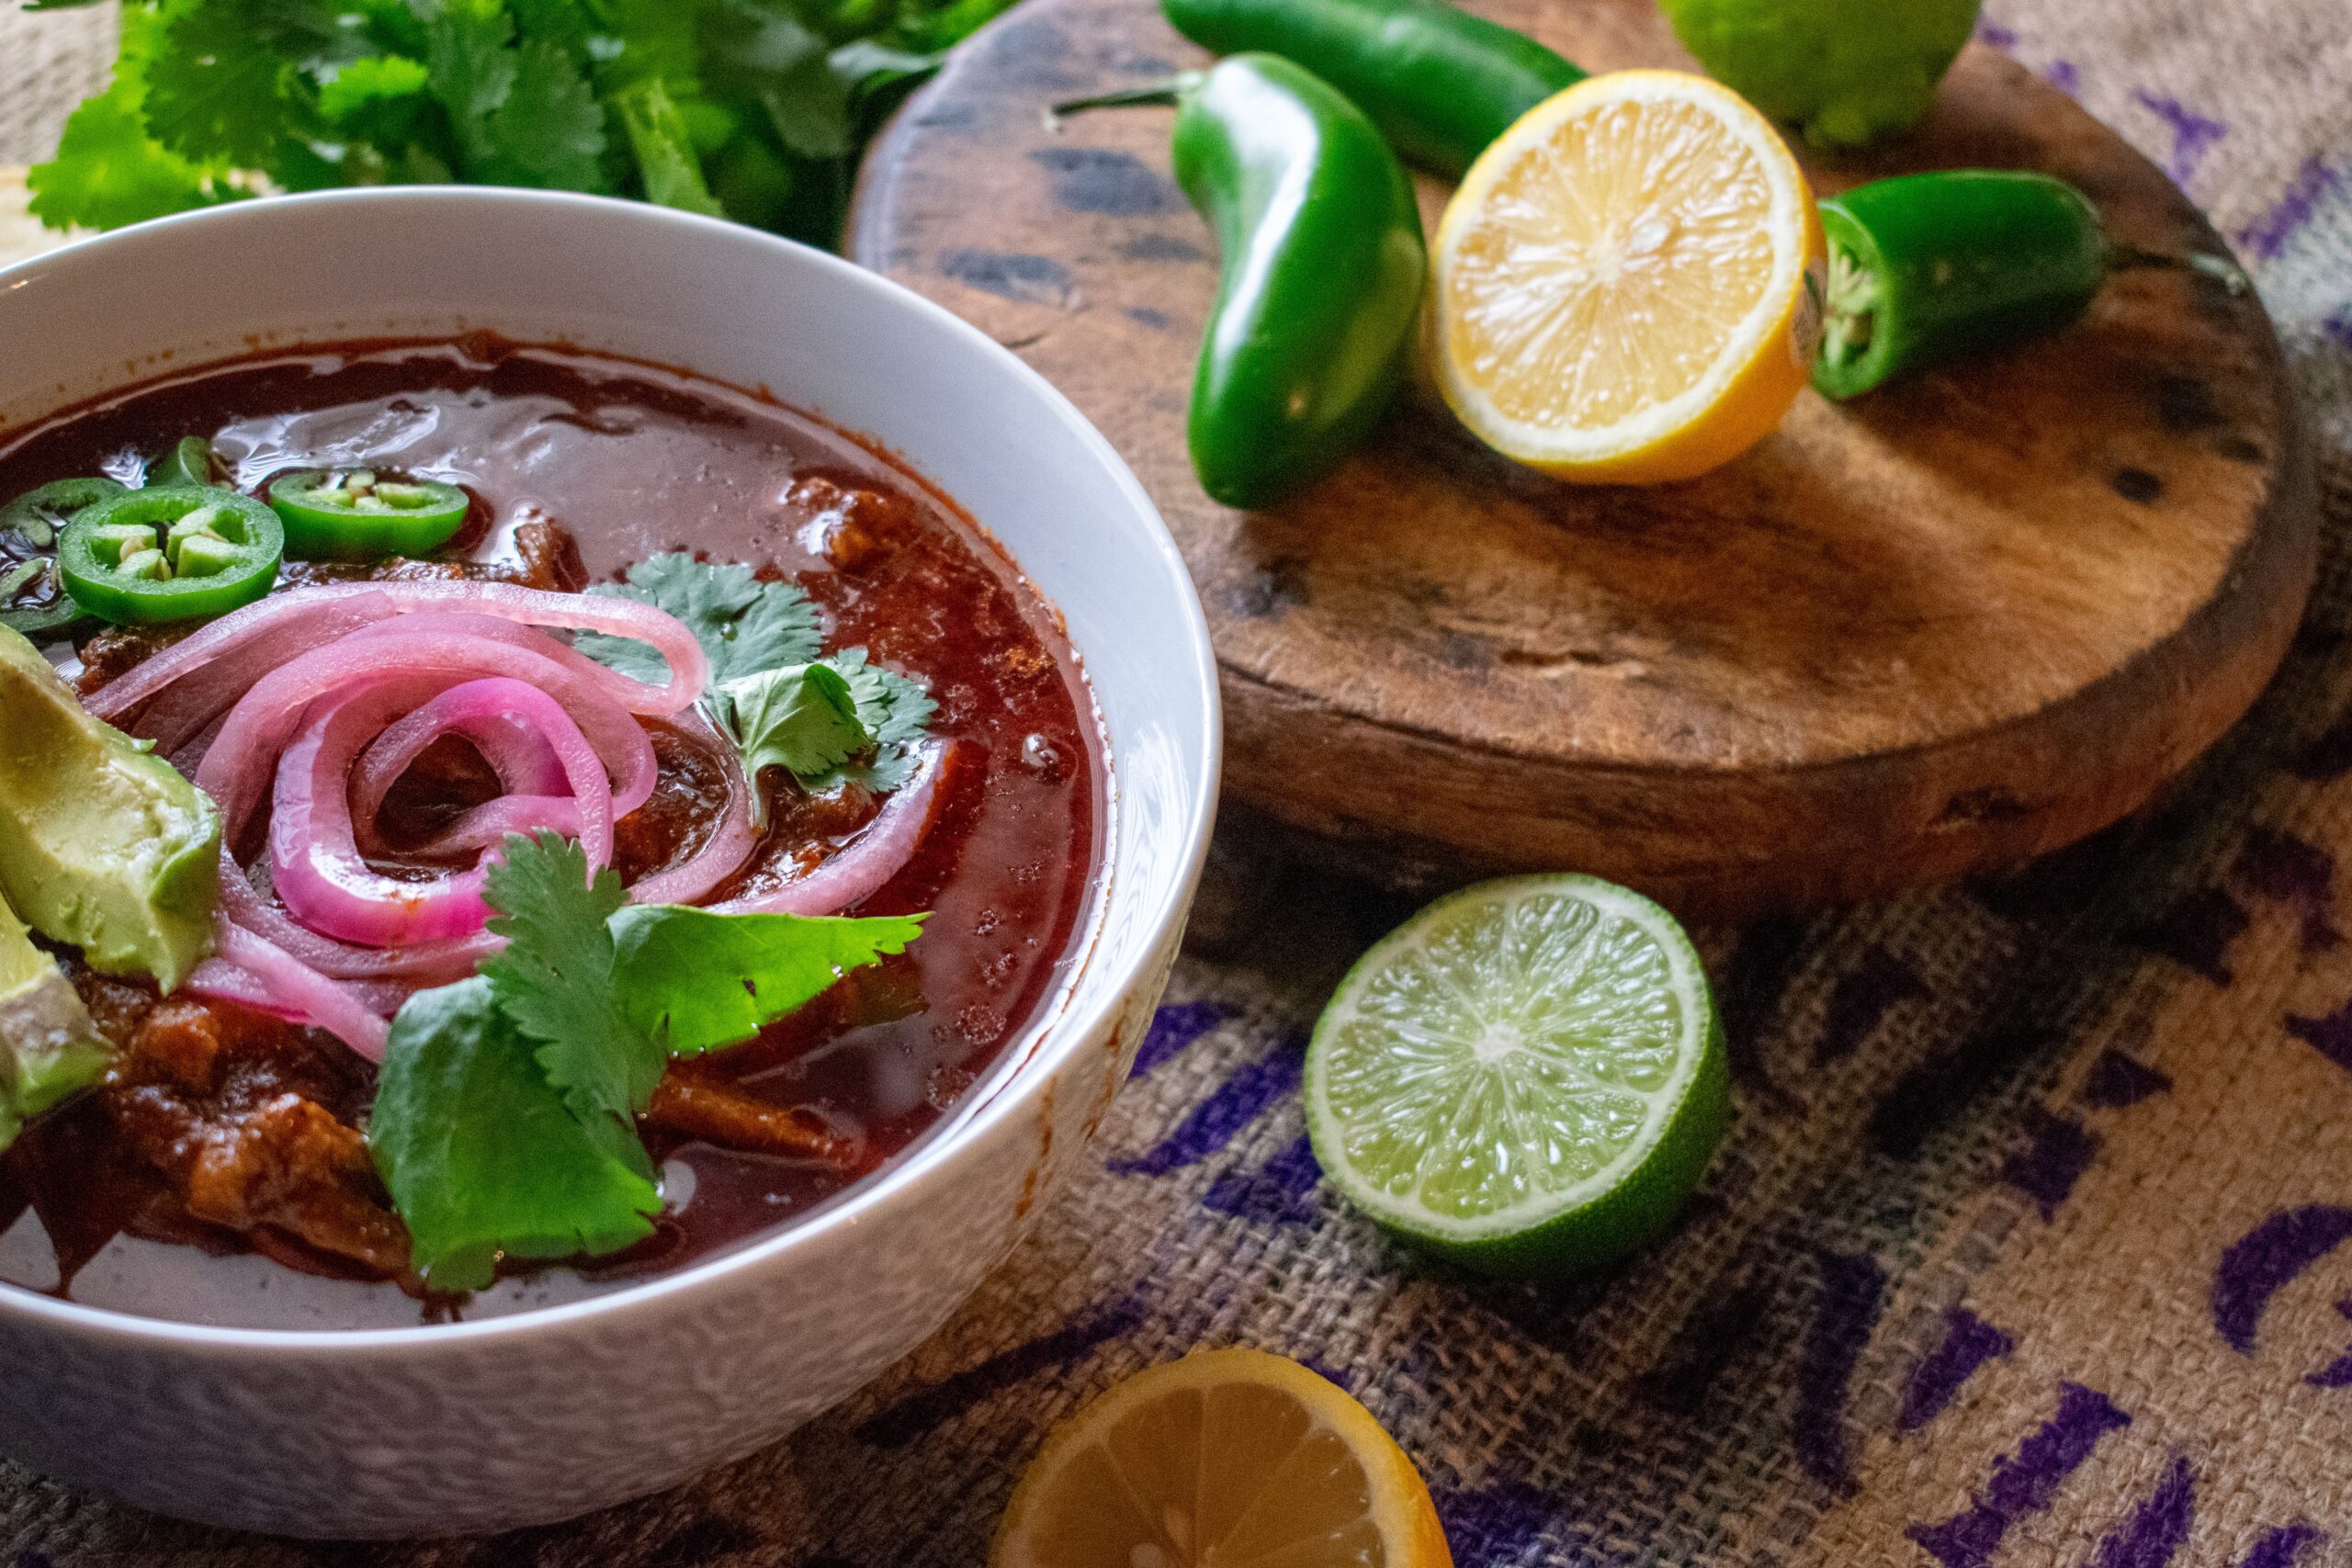 Share A Mexican Recipe That You Believe Represents The Heart Of The Countrys Culinary Heritage.